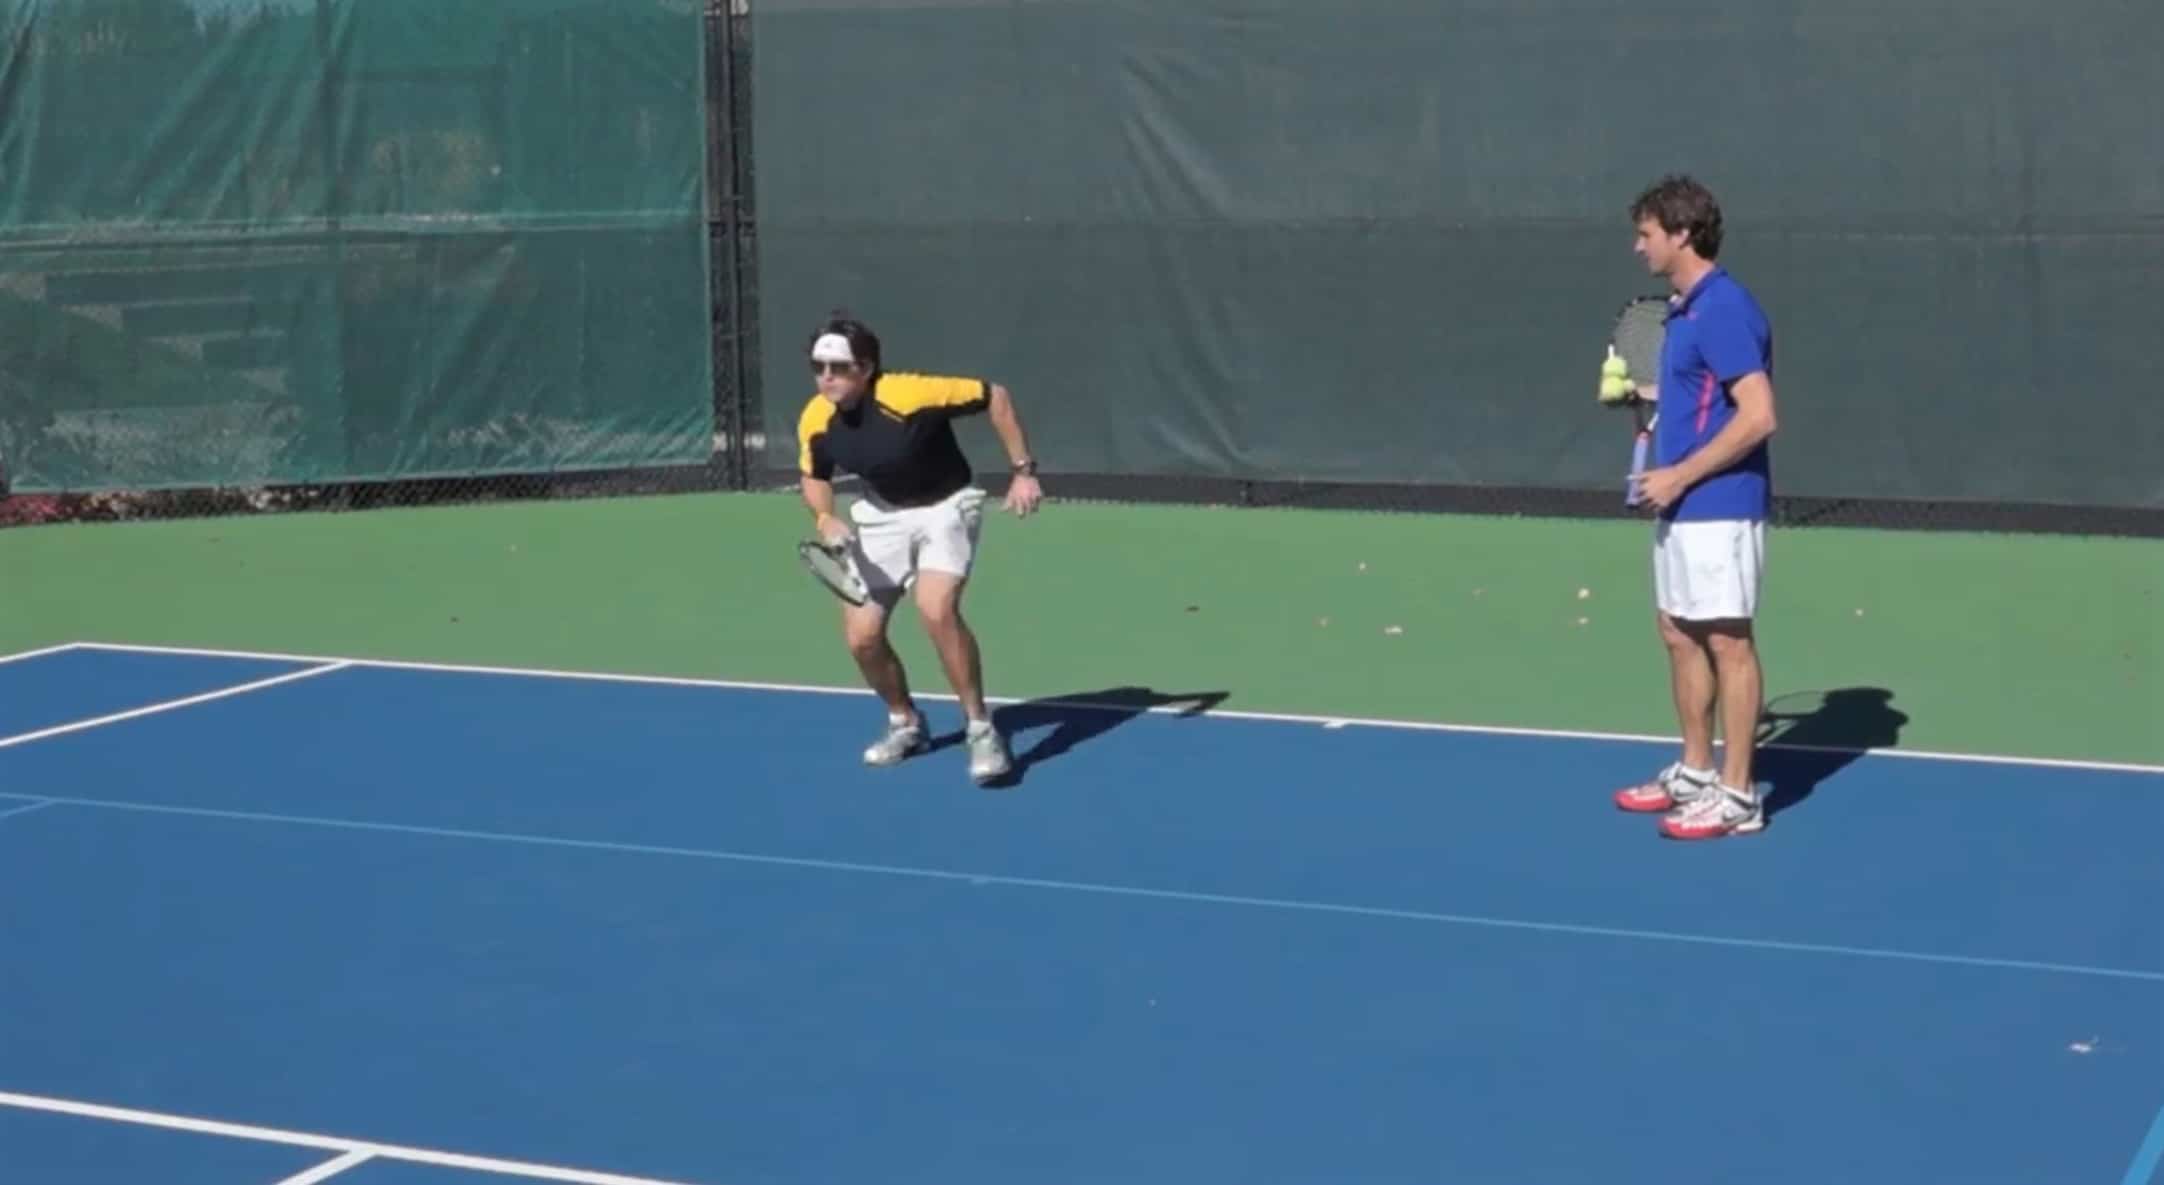 Jeff Salzenstein coaching a tennis player demonstrating serve and volley footwork.